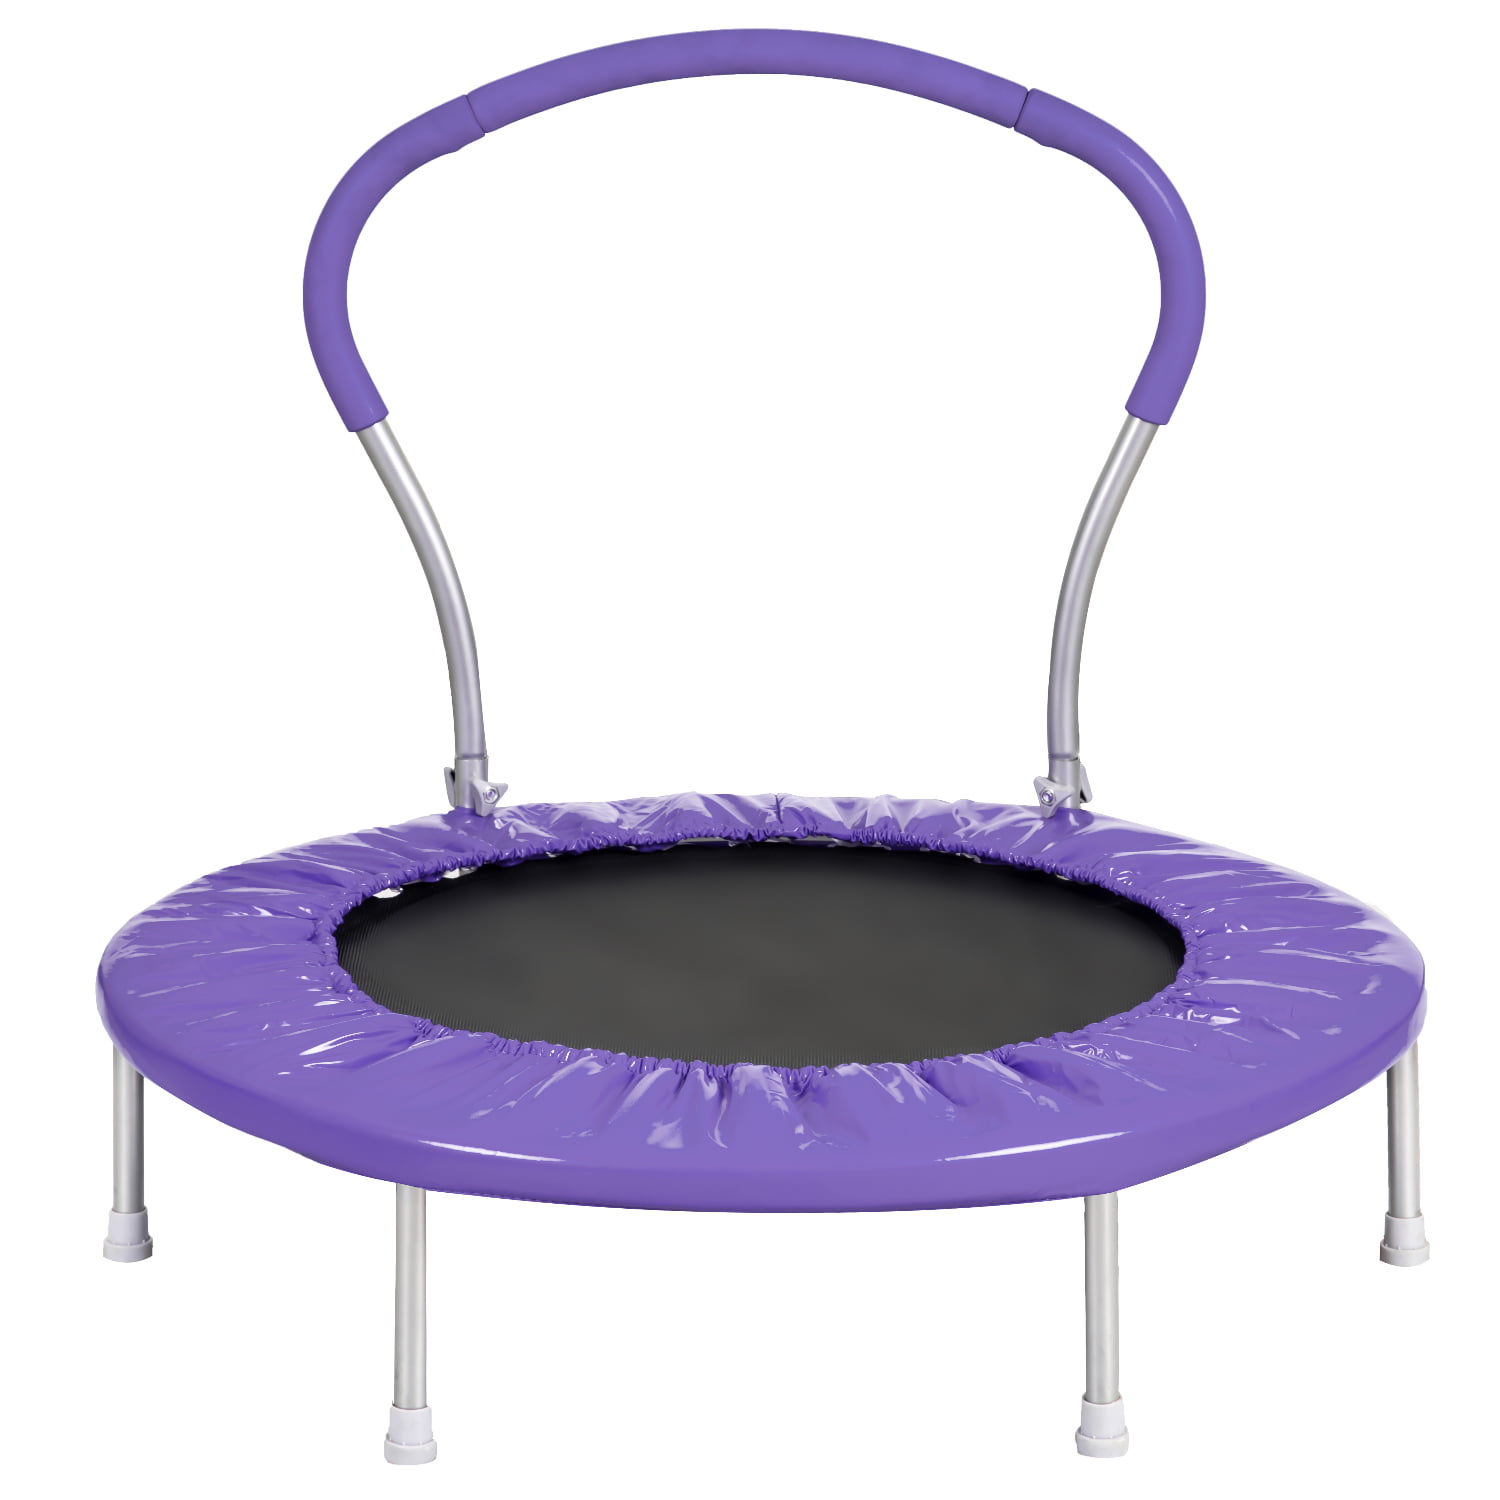 36&quot; Kids Indoor Trampoline, Small Toddler Trampoline for Boys Girls, Kids Trampoline Little Trampoline with Handrail and Safety Padded Cover, Mini Foldable Rebounder Fitness Trampoline, Purple, Q14389